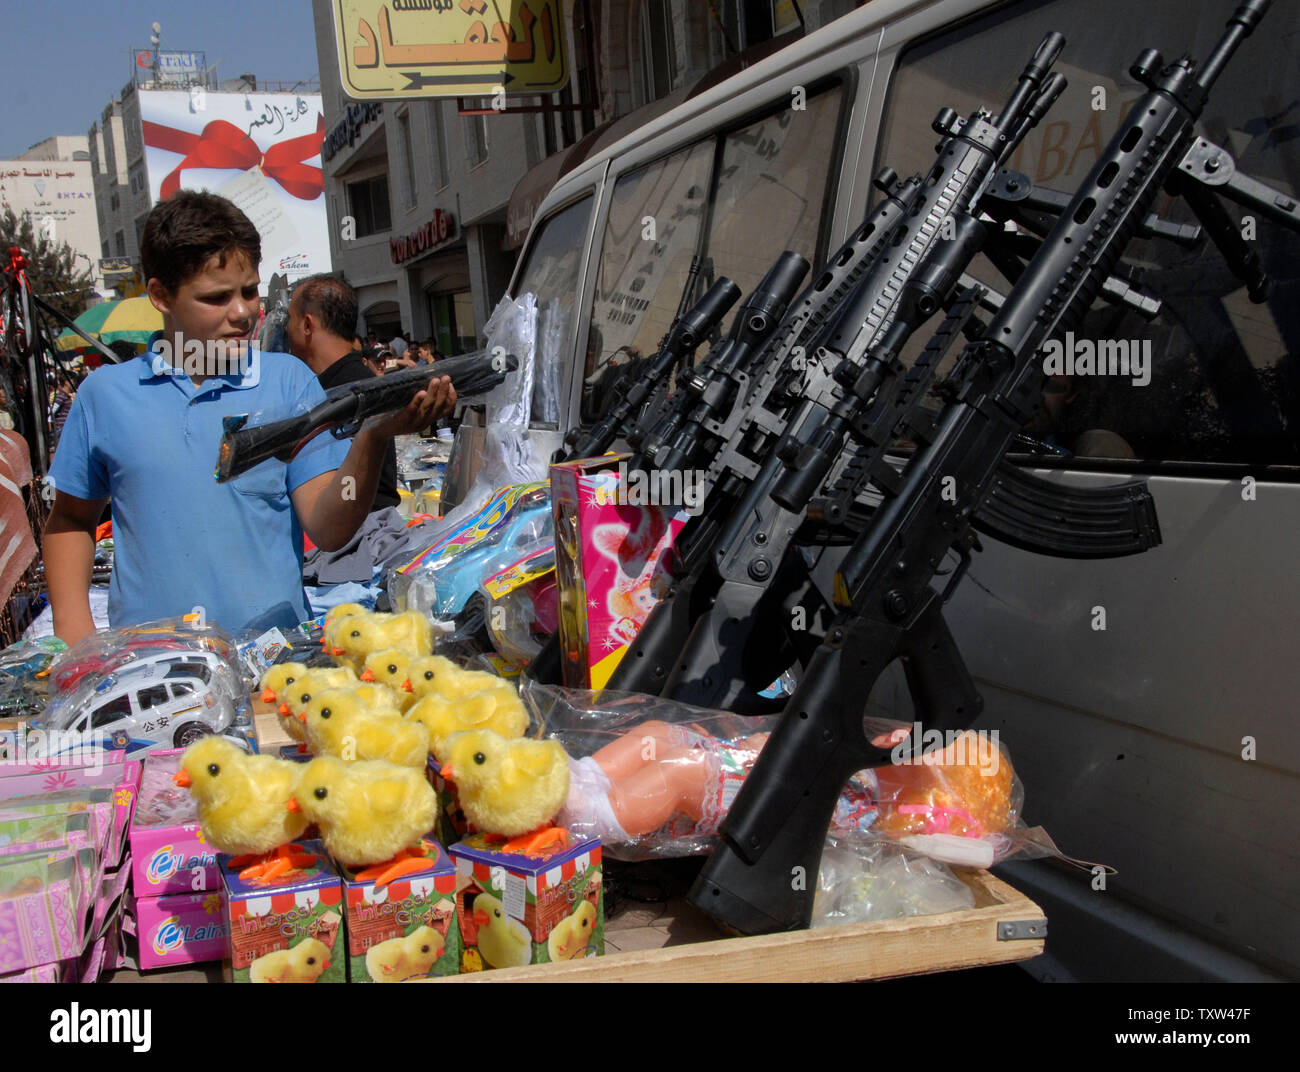 A Palestinian boy looks at a toy gun at a Ramadan market in central Ramallah, West Bank, October 10, 2007. Palestinians buy toy guns as gifts for children to mark the end of the holy month of Ramadan and to celebrate the three day holiday of Eid al-Fitr. (UPI Photo/Debbie Hill) Stock Photo